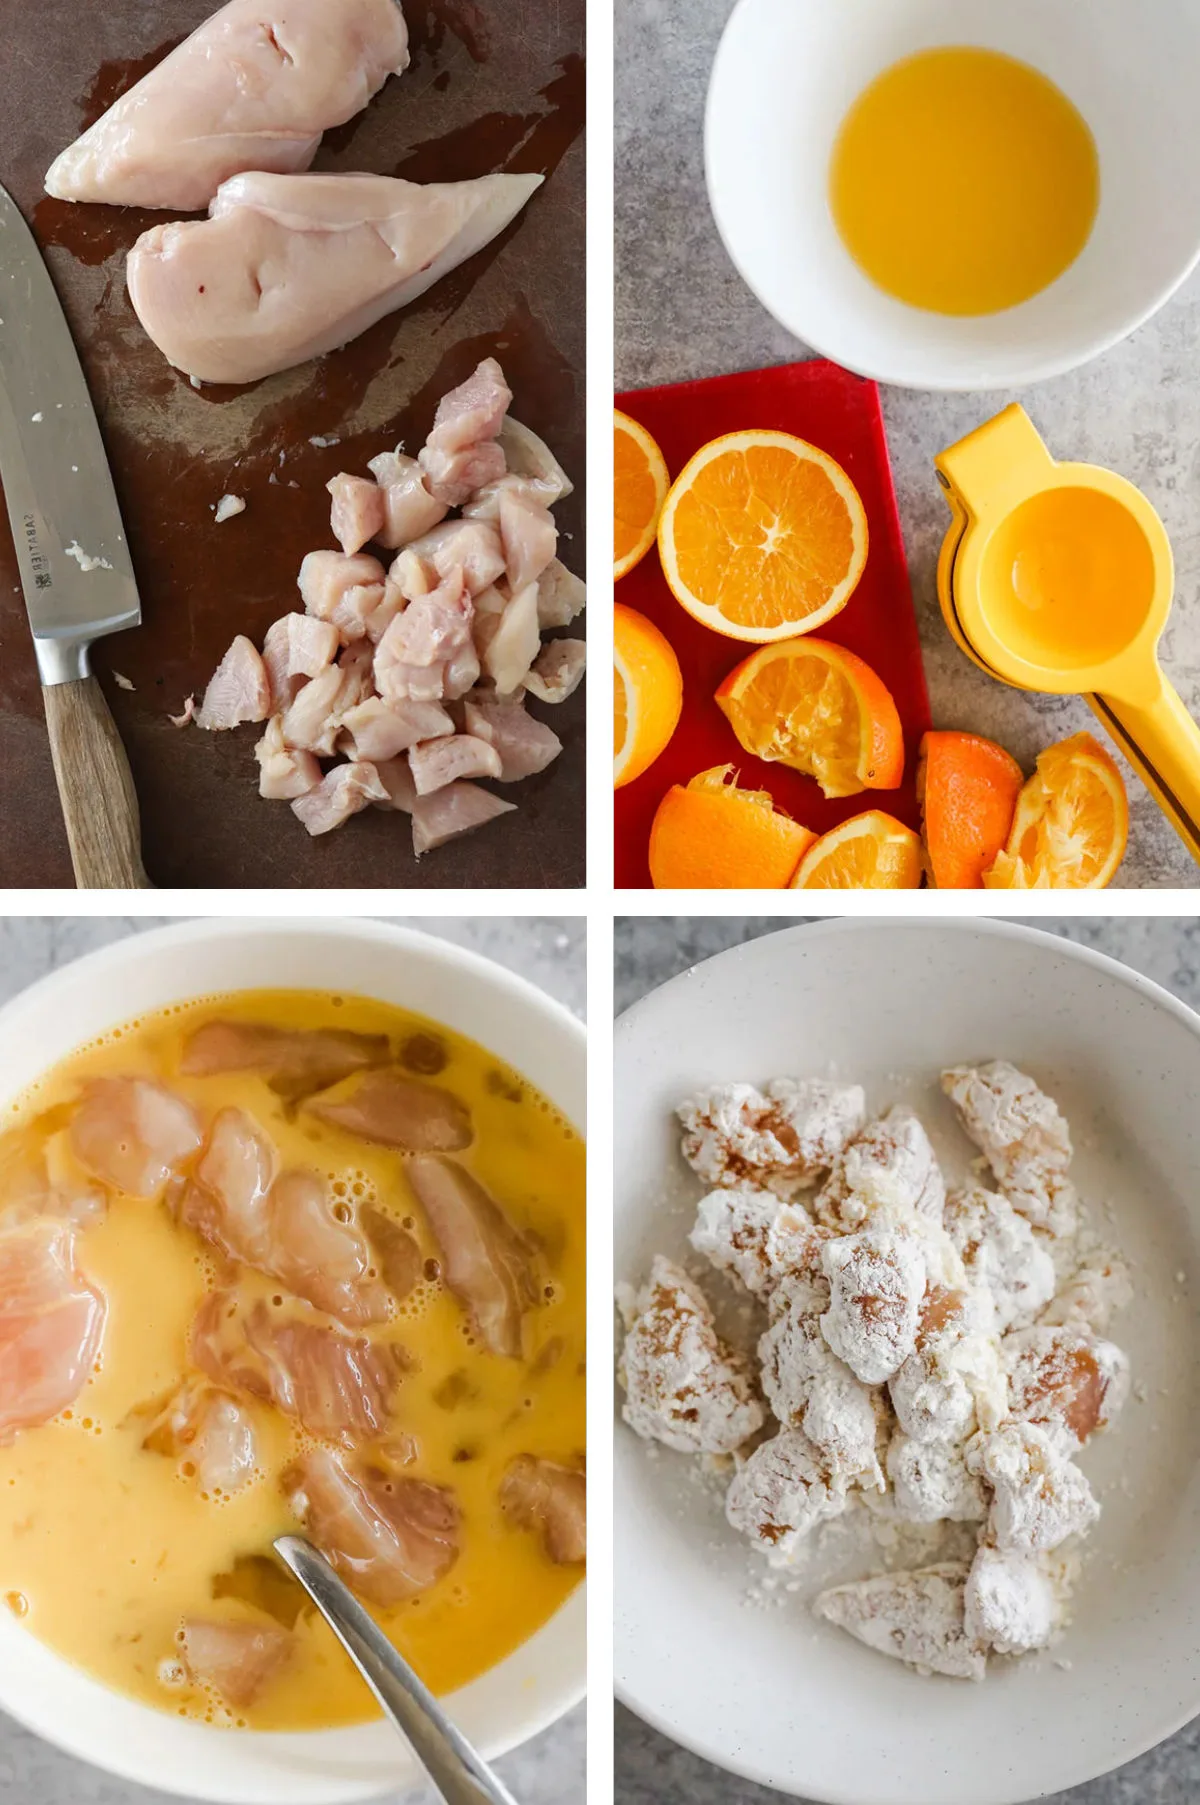 Four images. 1. raw chicken breasts next to chopped chicken breasts. 2. sliced oranges next to a hand juicer and bowl of orange juice. 3. chopped chicken in bowl of egg mixture. 4. battered raw chicken in bowl.